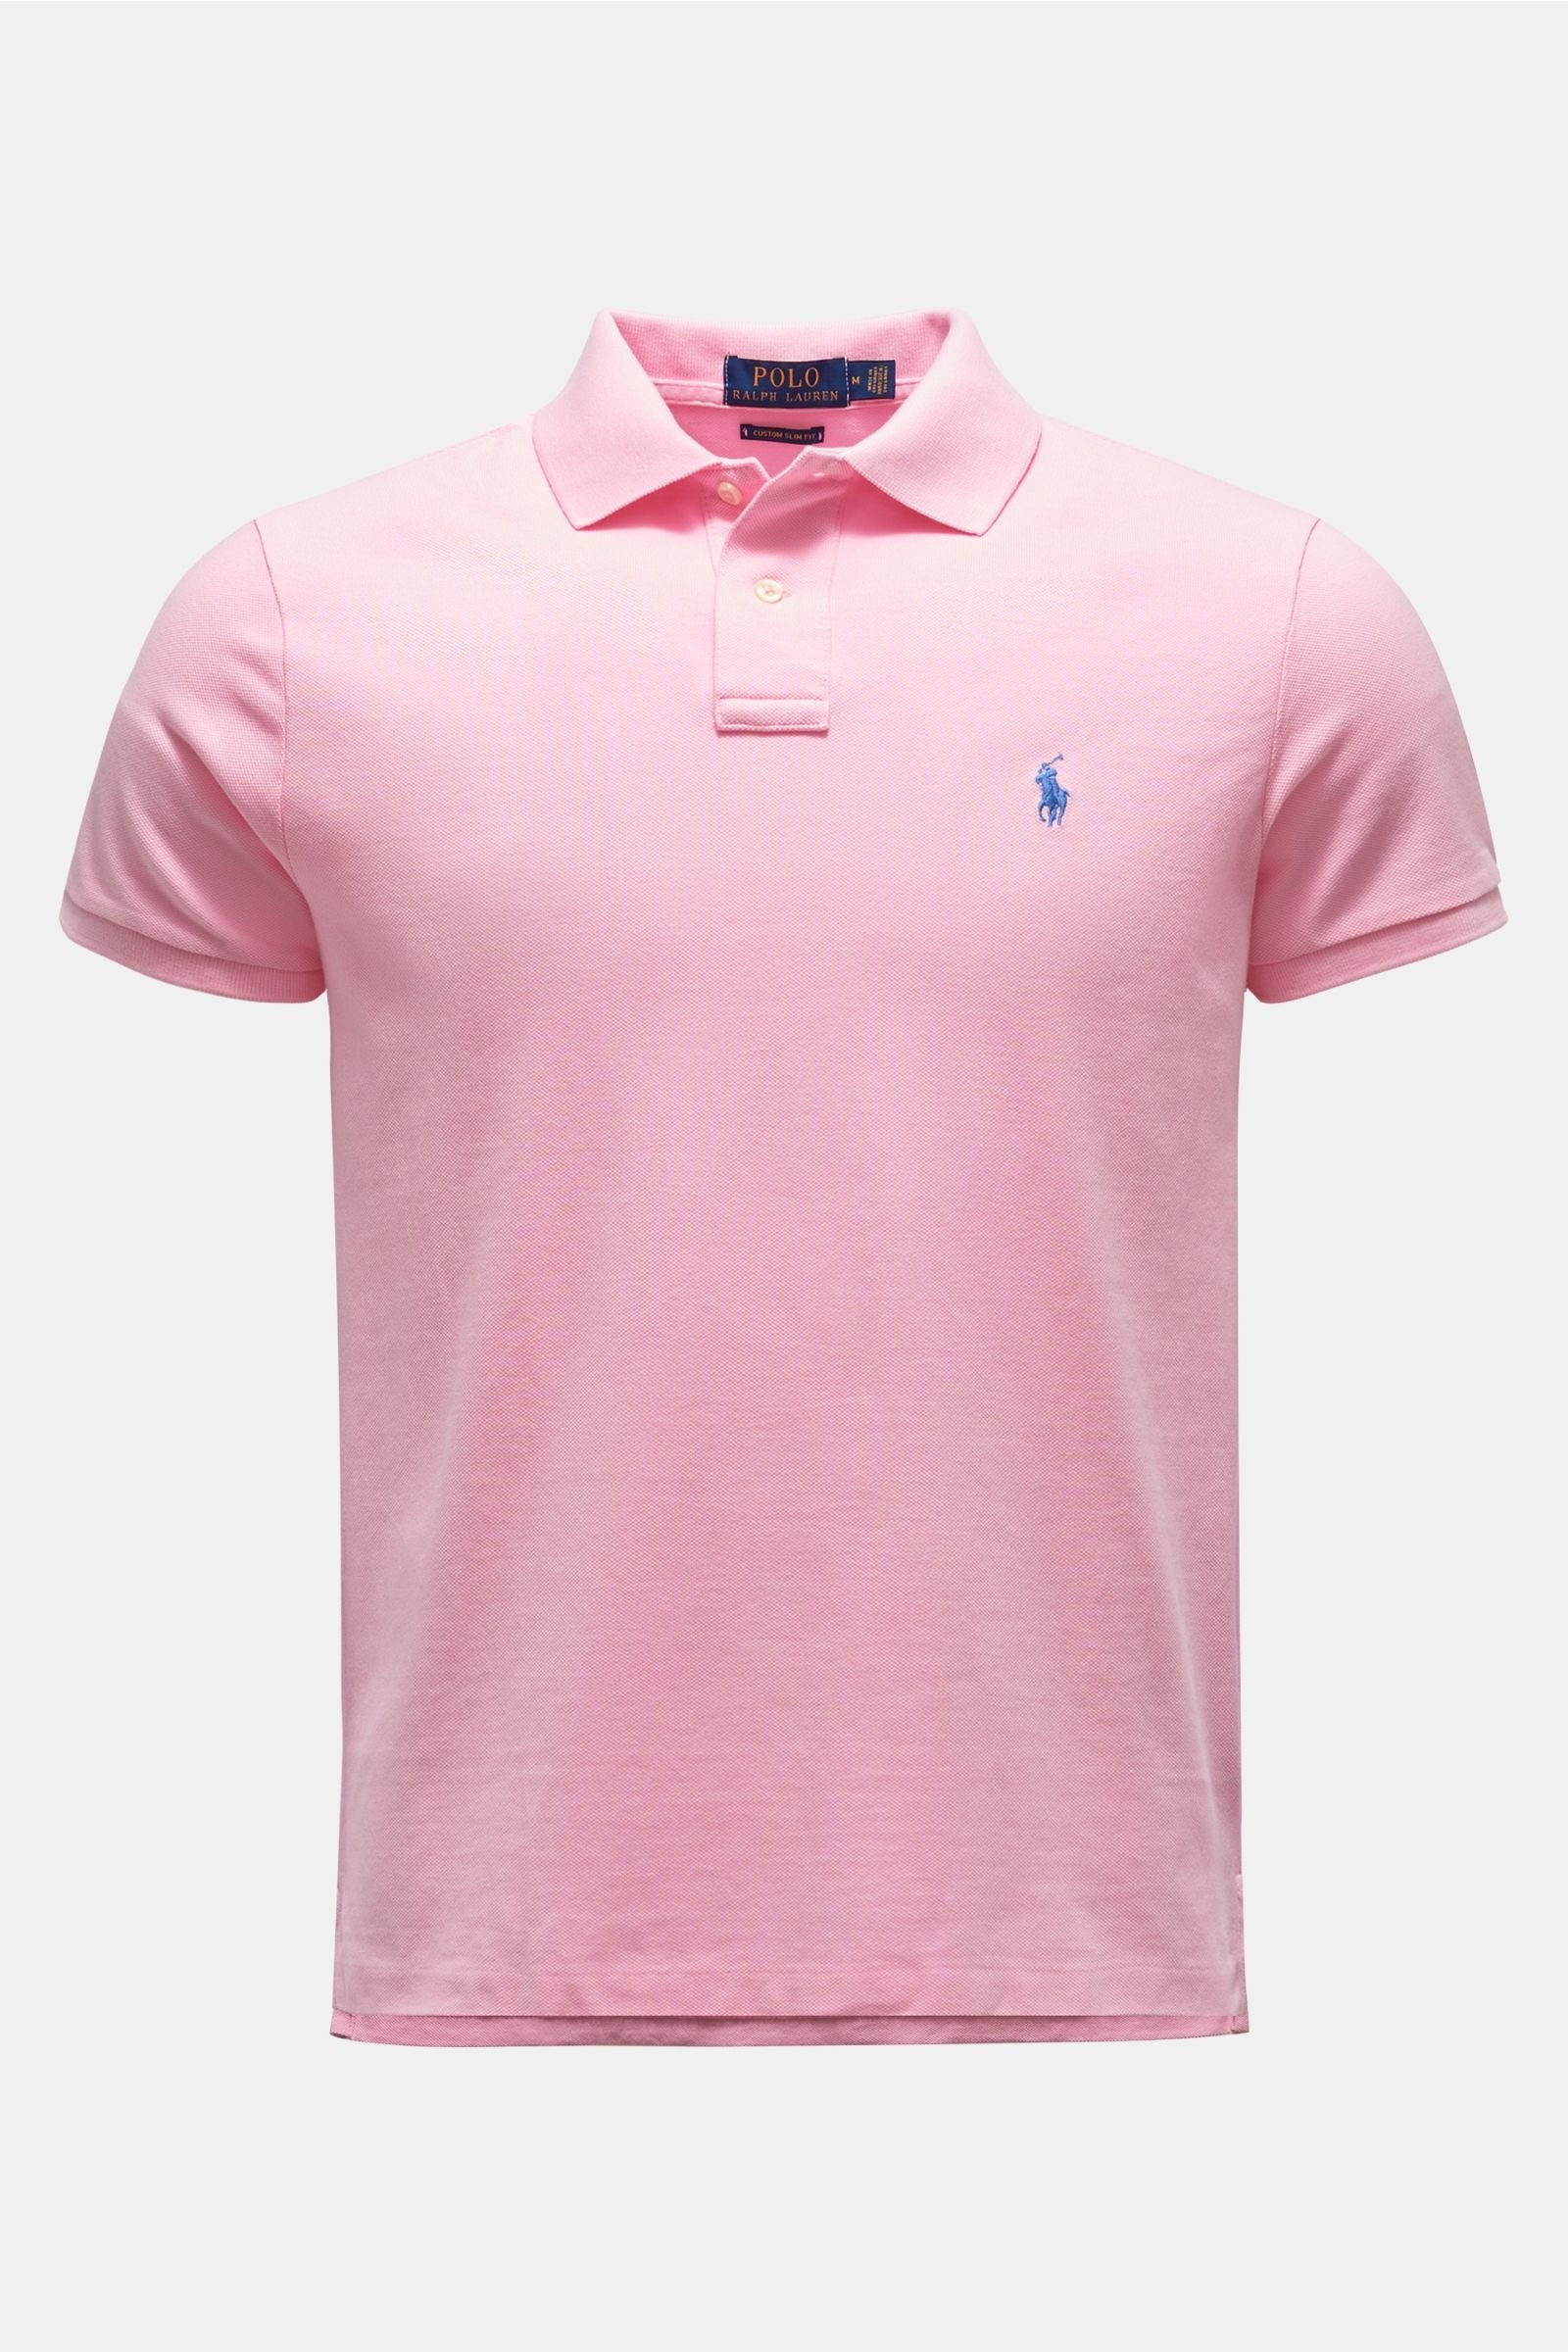 Polo shirt in rose